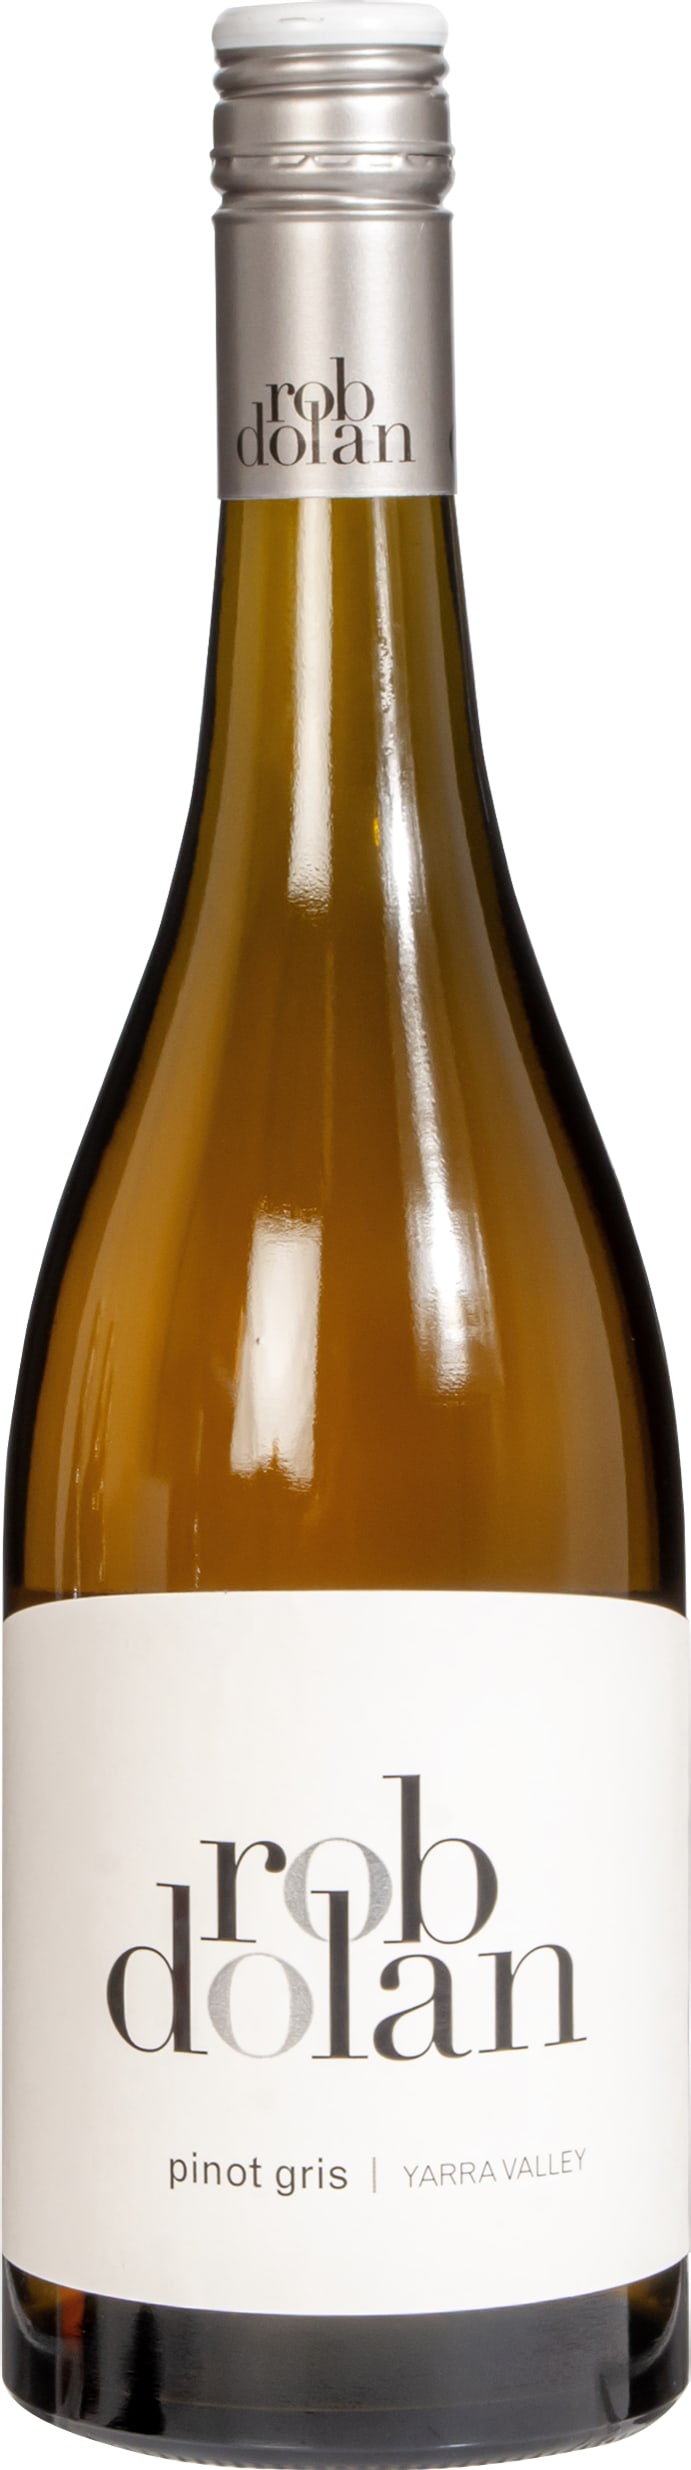 Rob Dolan White Label Pinot Gris 2021 75cl - Buy Rob Dolan Wines from GREAT WINES DIRECT wine shop